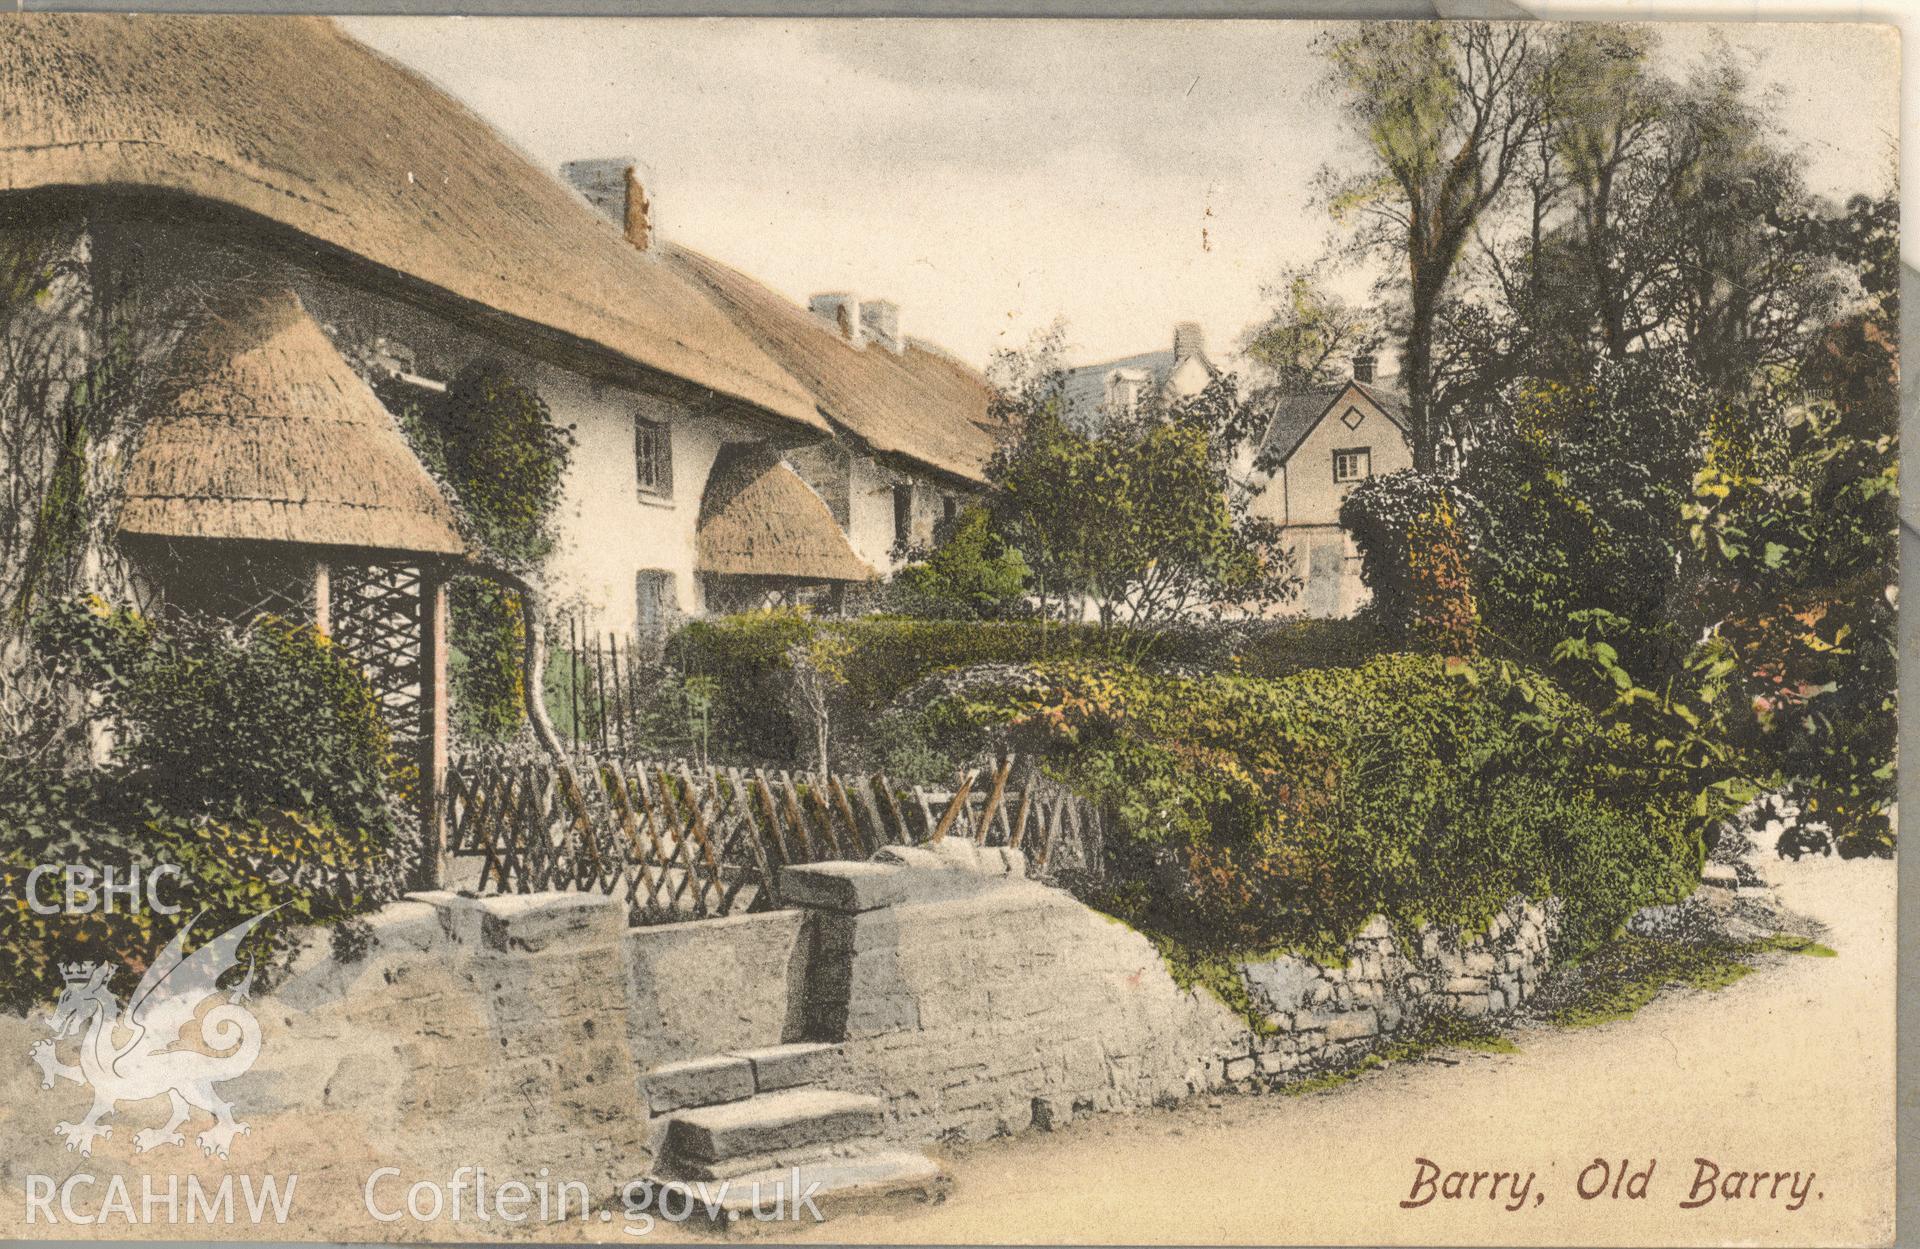 Digitised postcard image of thatched cottages in Barry, Valentine's Series. Produced by Parks and Gardens Data Services, from an original item in the Peter Davis Collection at Parks and Gardens UK. We hold only web-resolution images of this collection, suitable for viewing on screen and for research purposes only. We do not hold the original images, or publication quality scans.